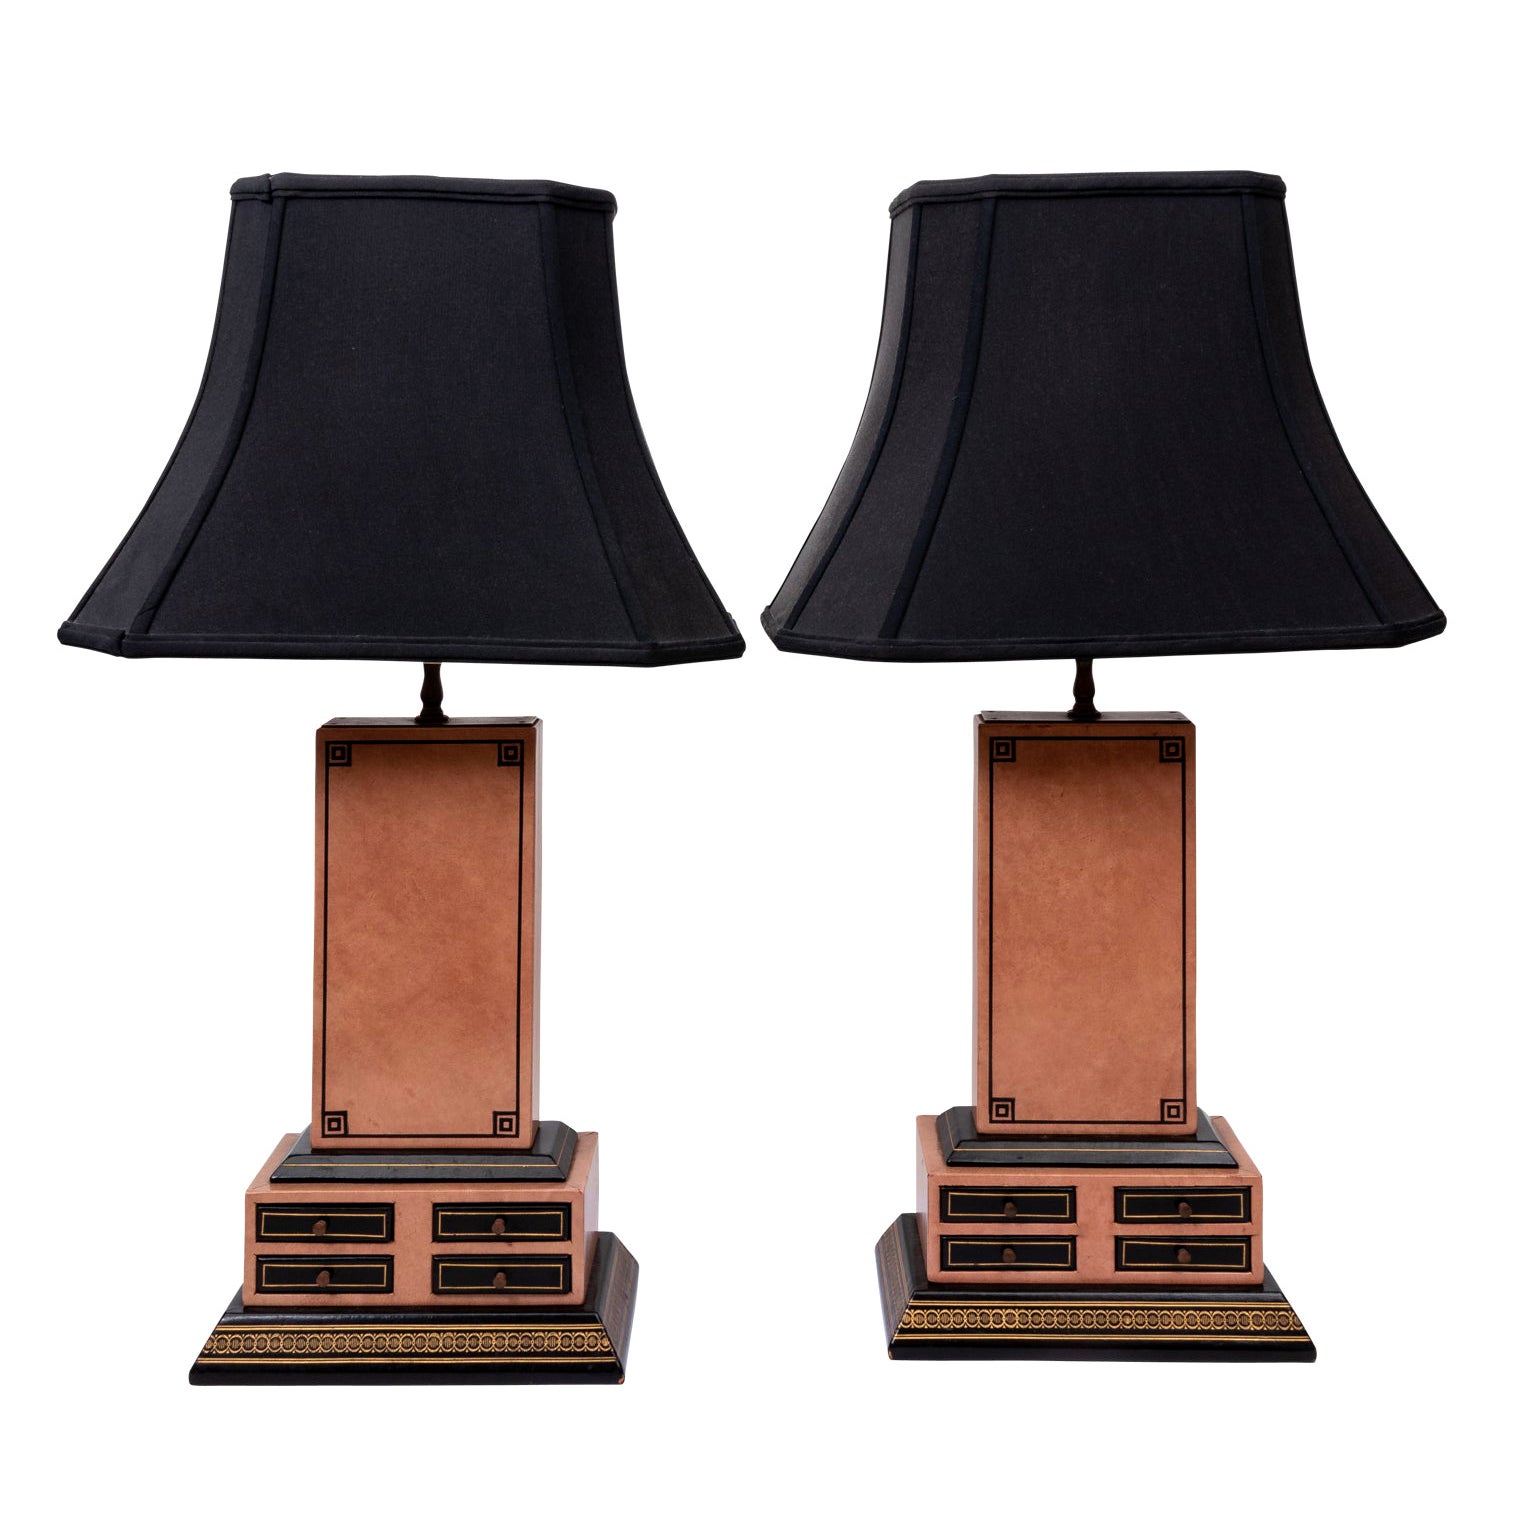 Pair of Glove Leather Covered Lamps with Drawers